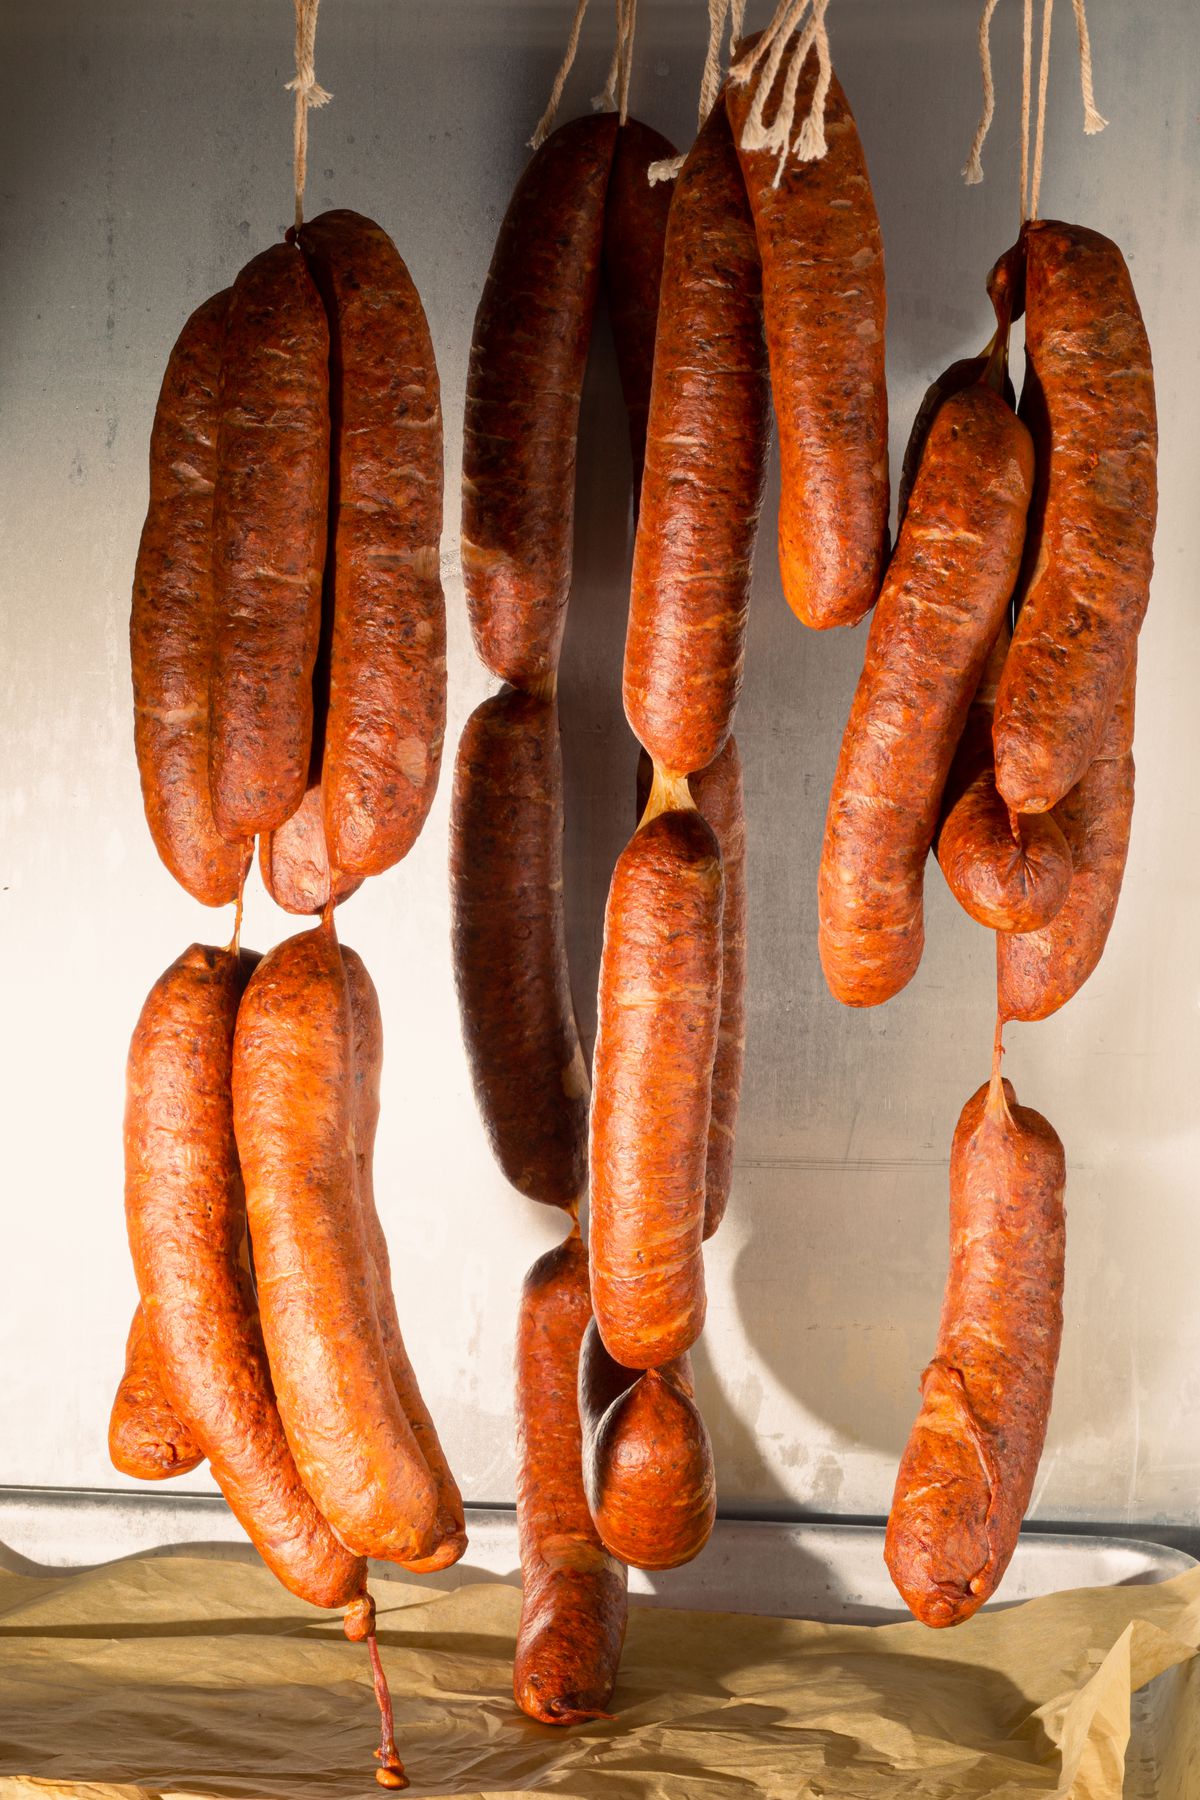 Strings of sausages hang over a piece of parchment paper.